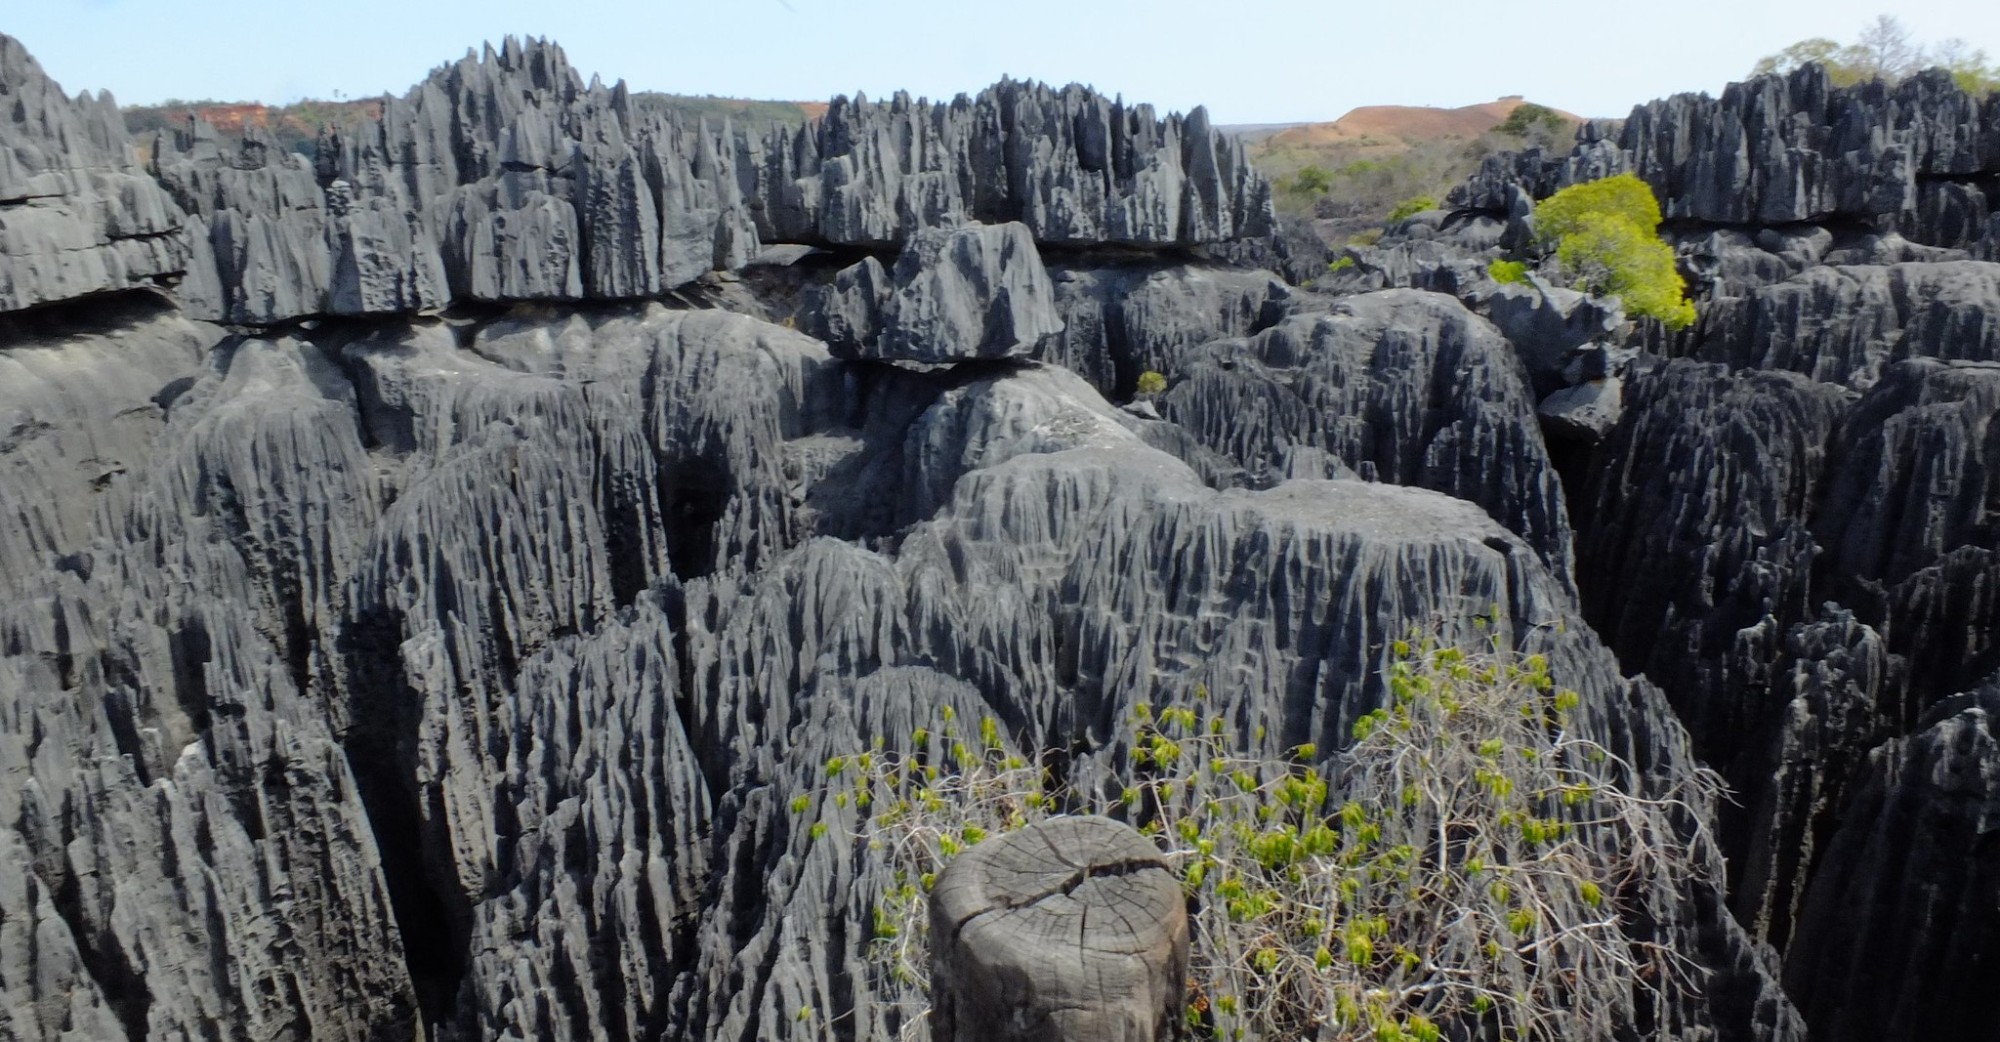 The genesis of the Tsingy dates back approximately 200 million years, when Madagascar was submerged beneath the ocean. Over time, coral reefs flourished and solidified into limestone bedrock. Aptly nicknamed the "Forest of Knives," it owes its formation to millions of years of geological processes.